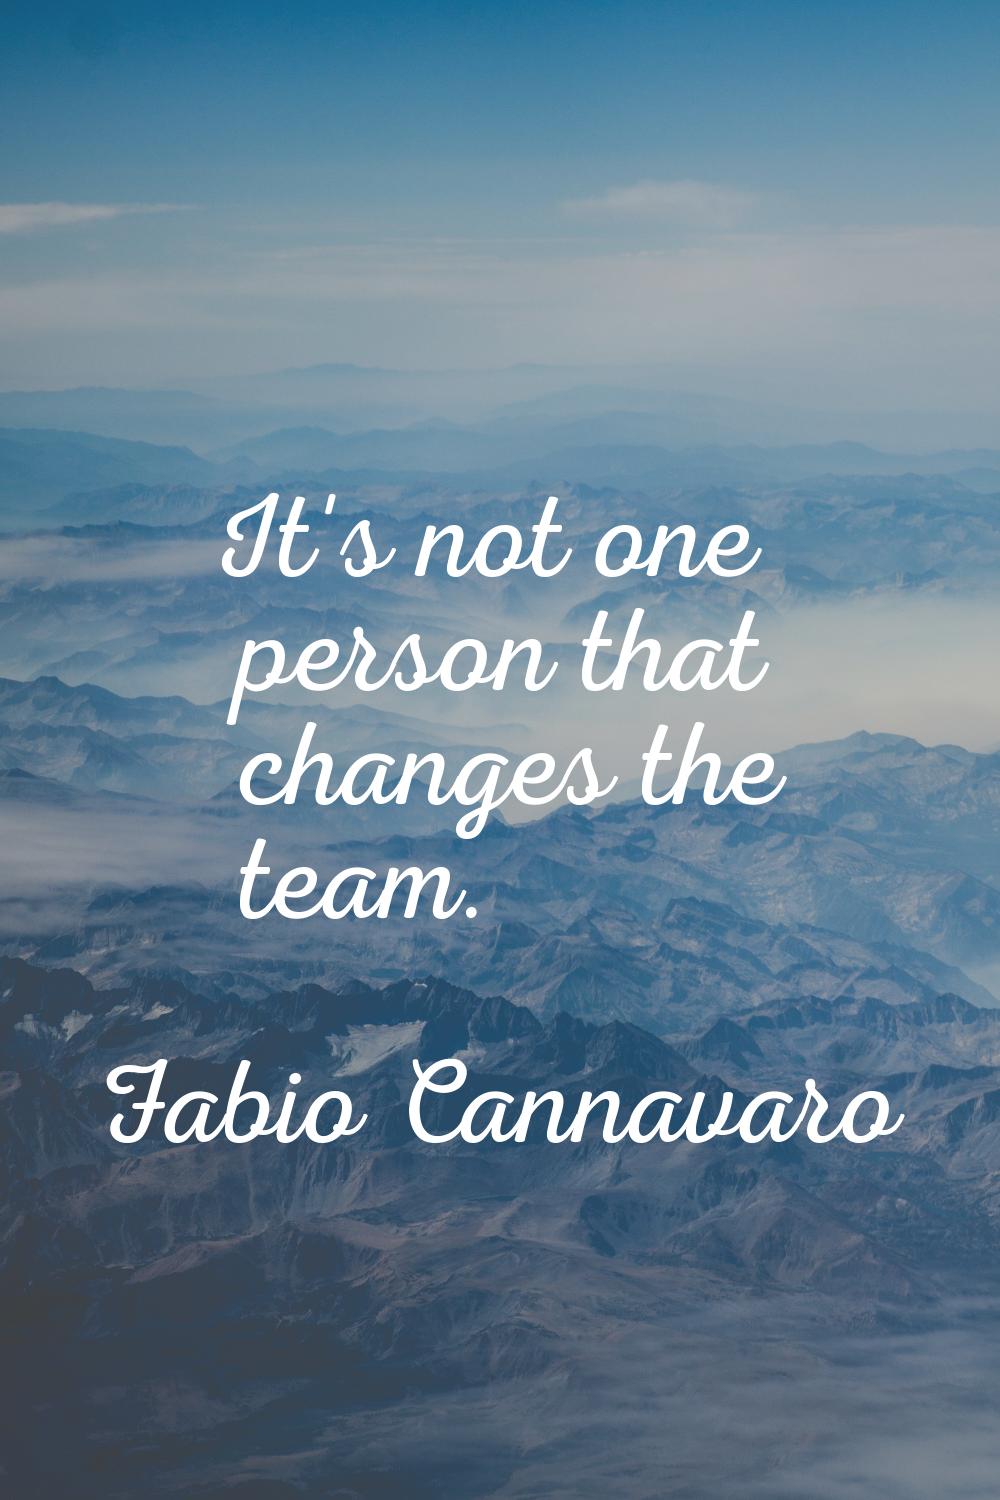 It's not one person that changes the team.